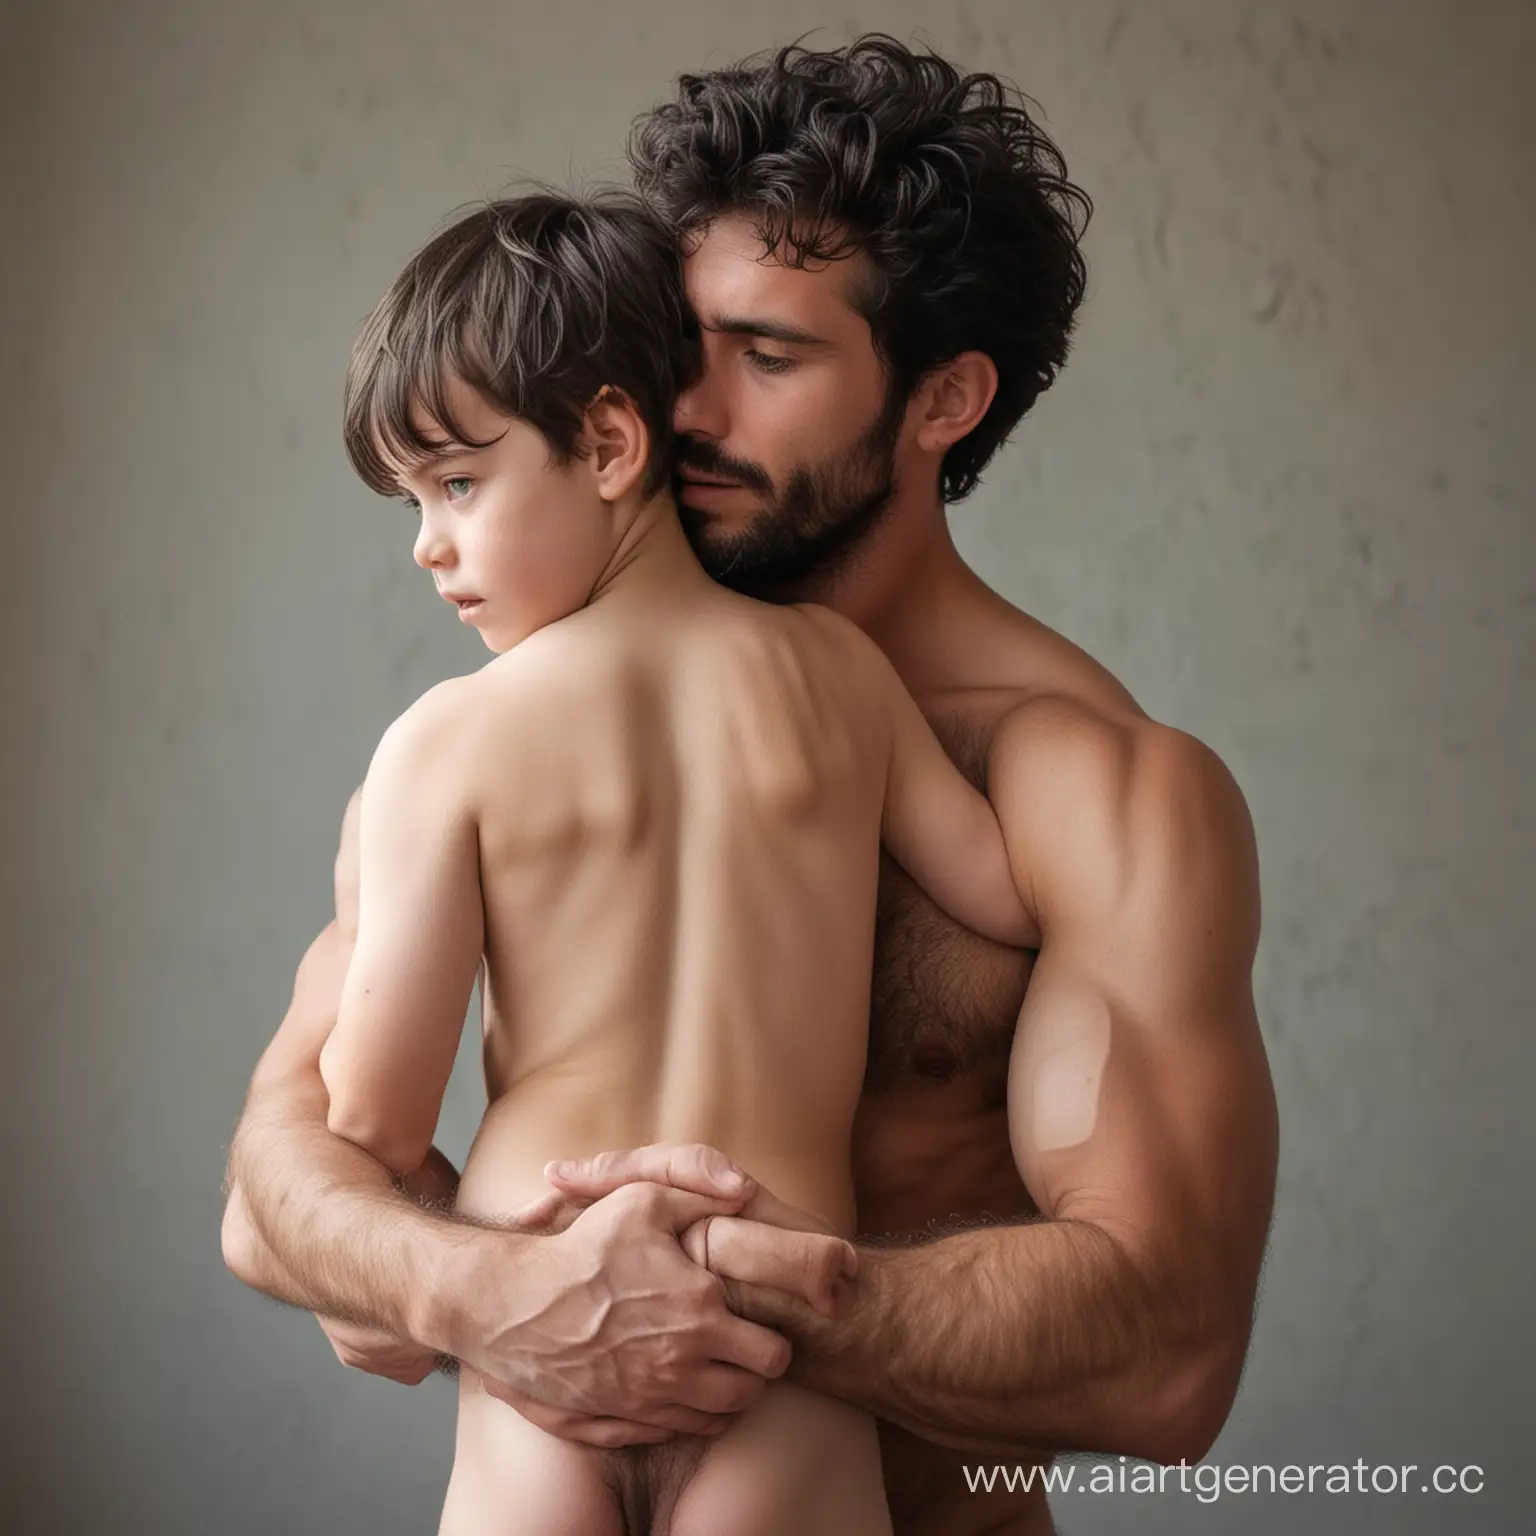 Embracing-Father-and-Son-Bonding-Moment-between-Strong-Man-and-Small-Boy